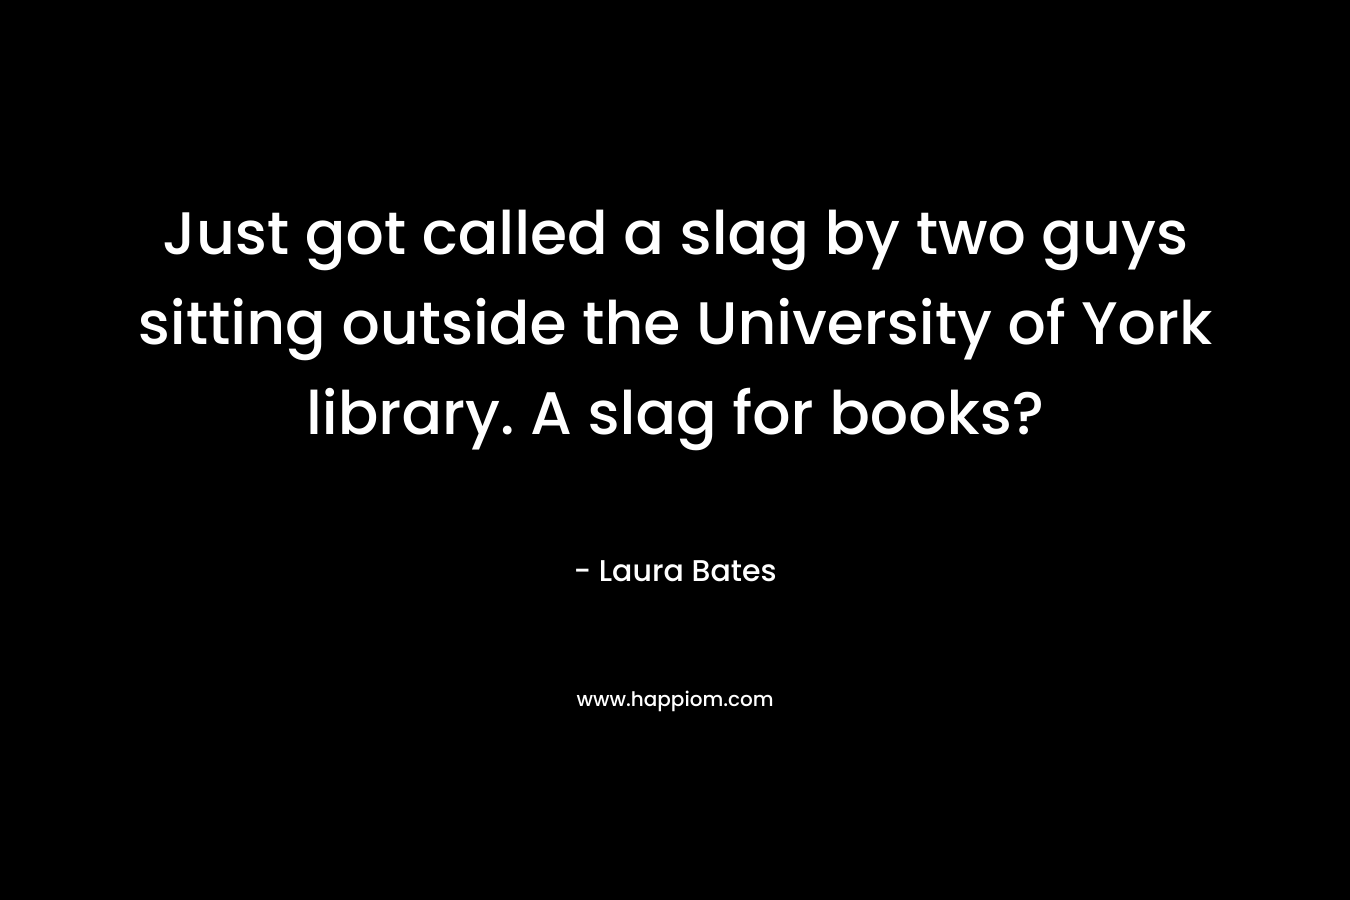 Just got called a slag by two guys sitting outside the University of York library. A slag for books?